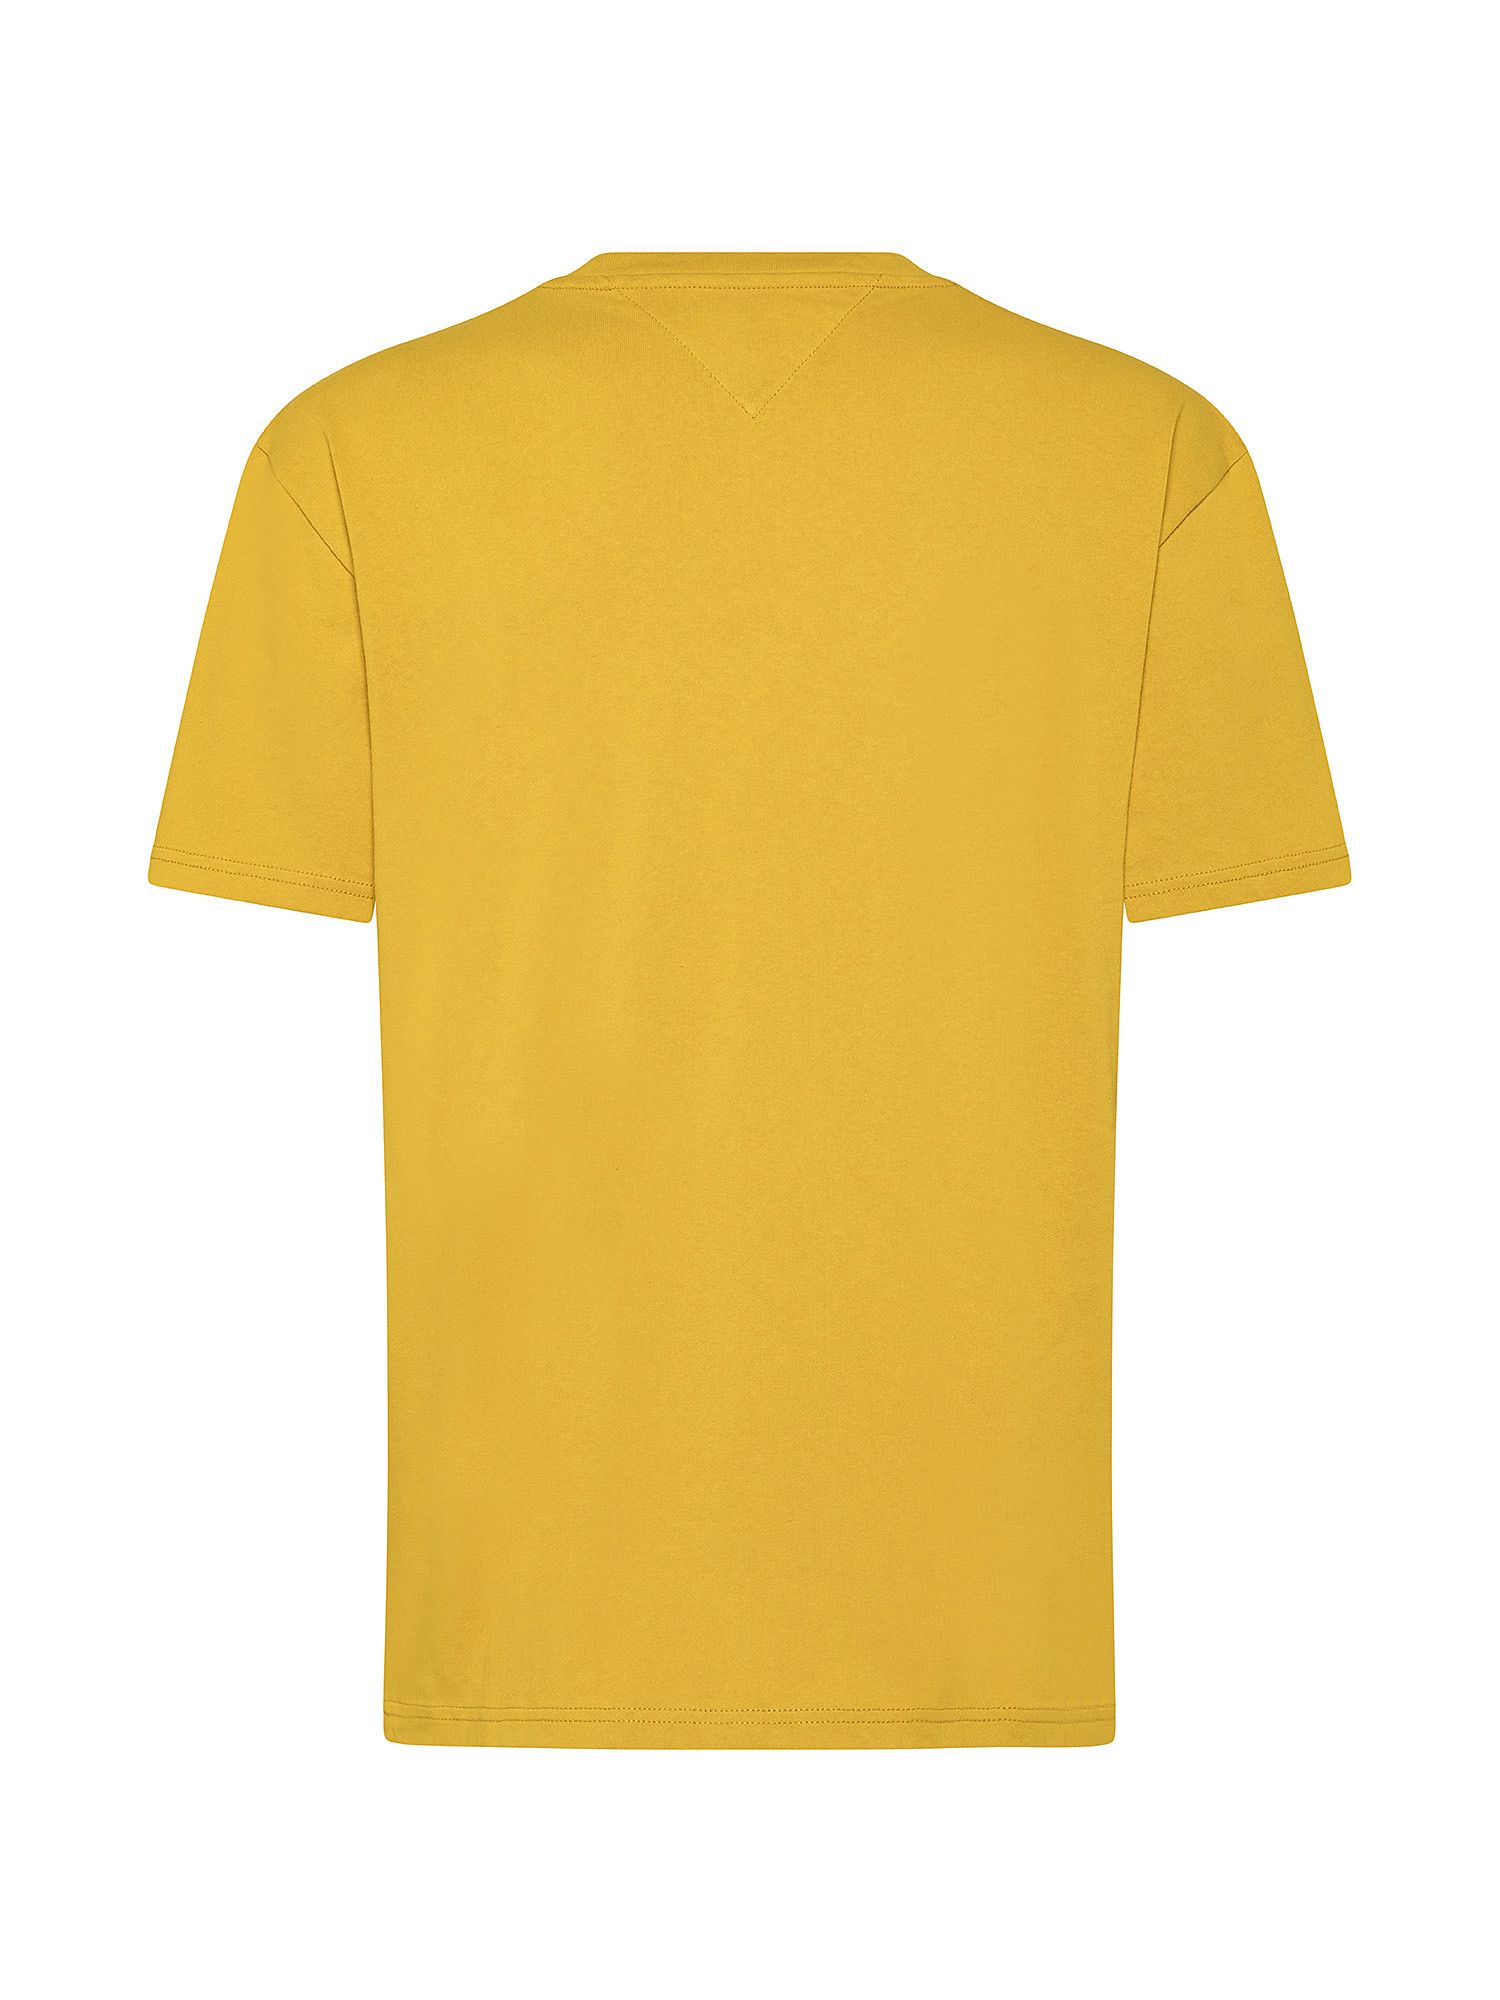 Tommy Jeans - Crewneck T-shirt with logo, Yellow, large image number 1